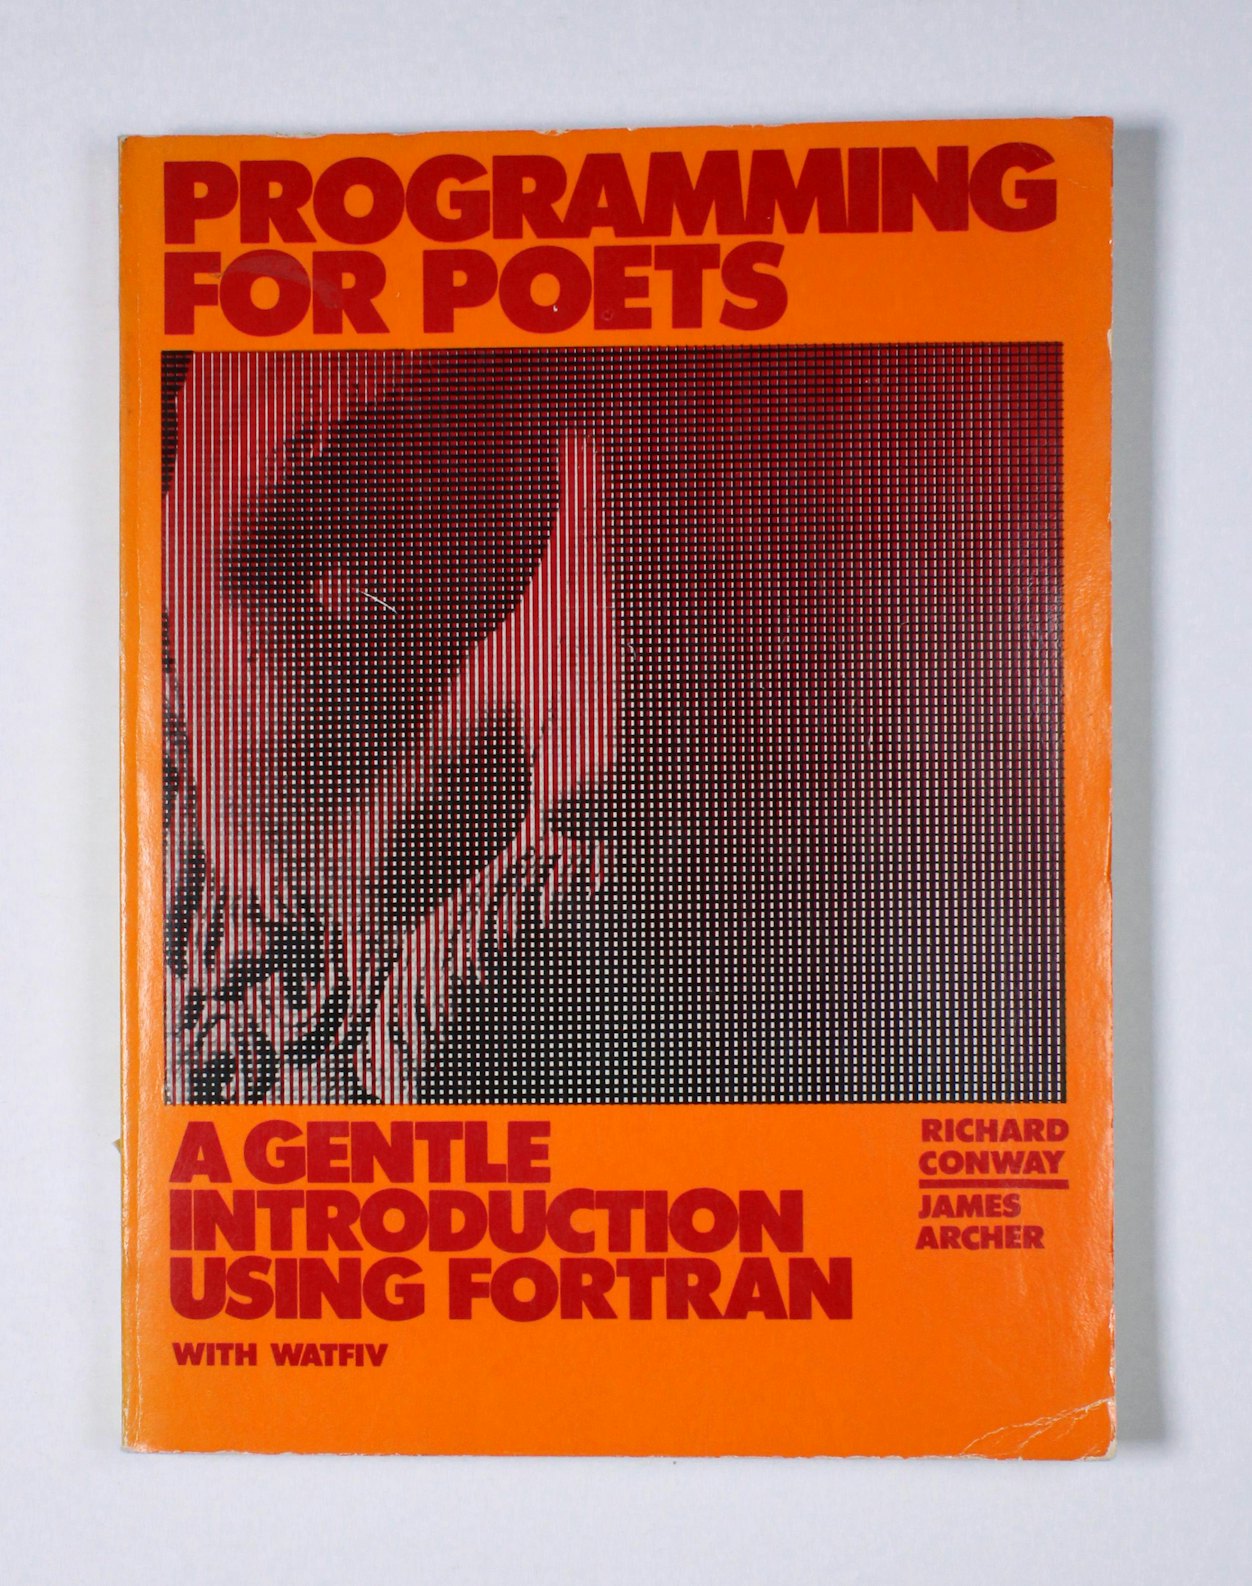 Programming for Poets: A Gentle Introduction Using FORTRAN with WATFIV